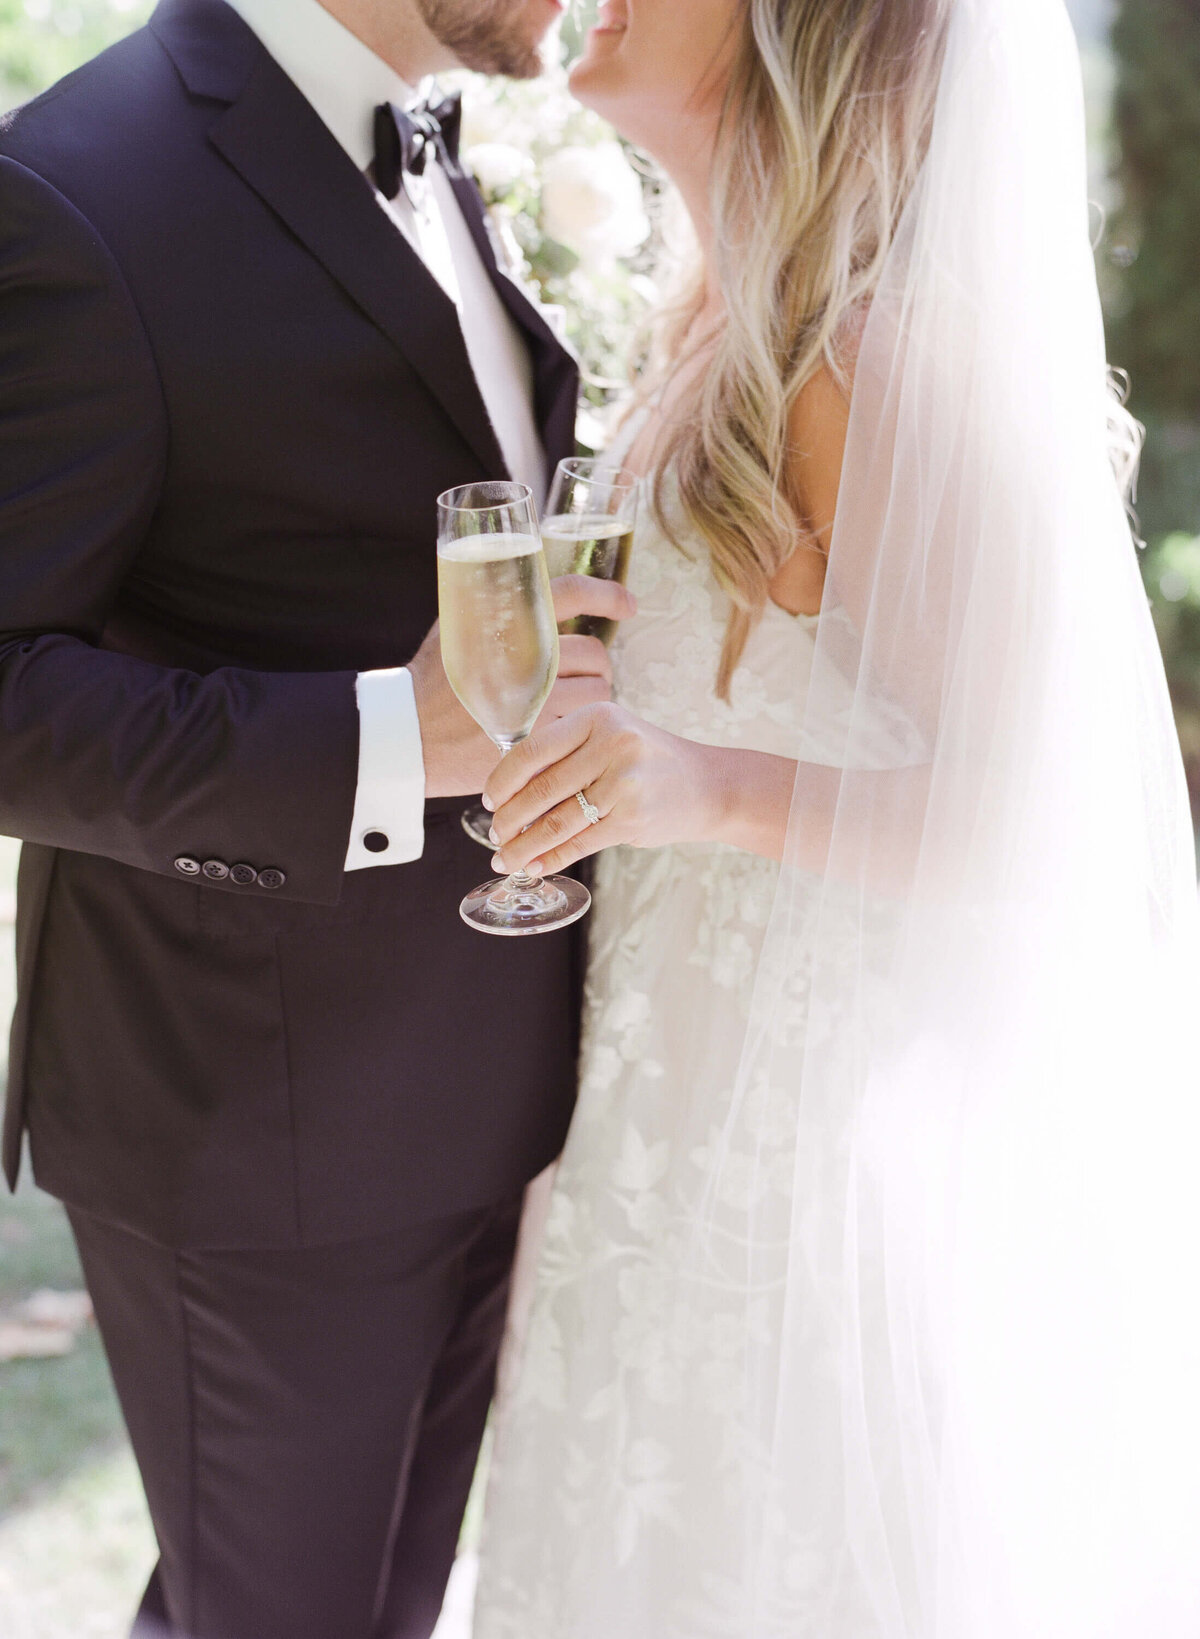 Happily married bride and groom lean into each other for a kiss while holding fizzy champagne glasses.